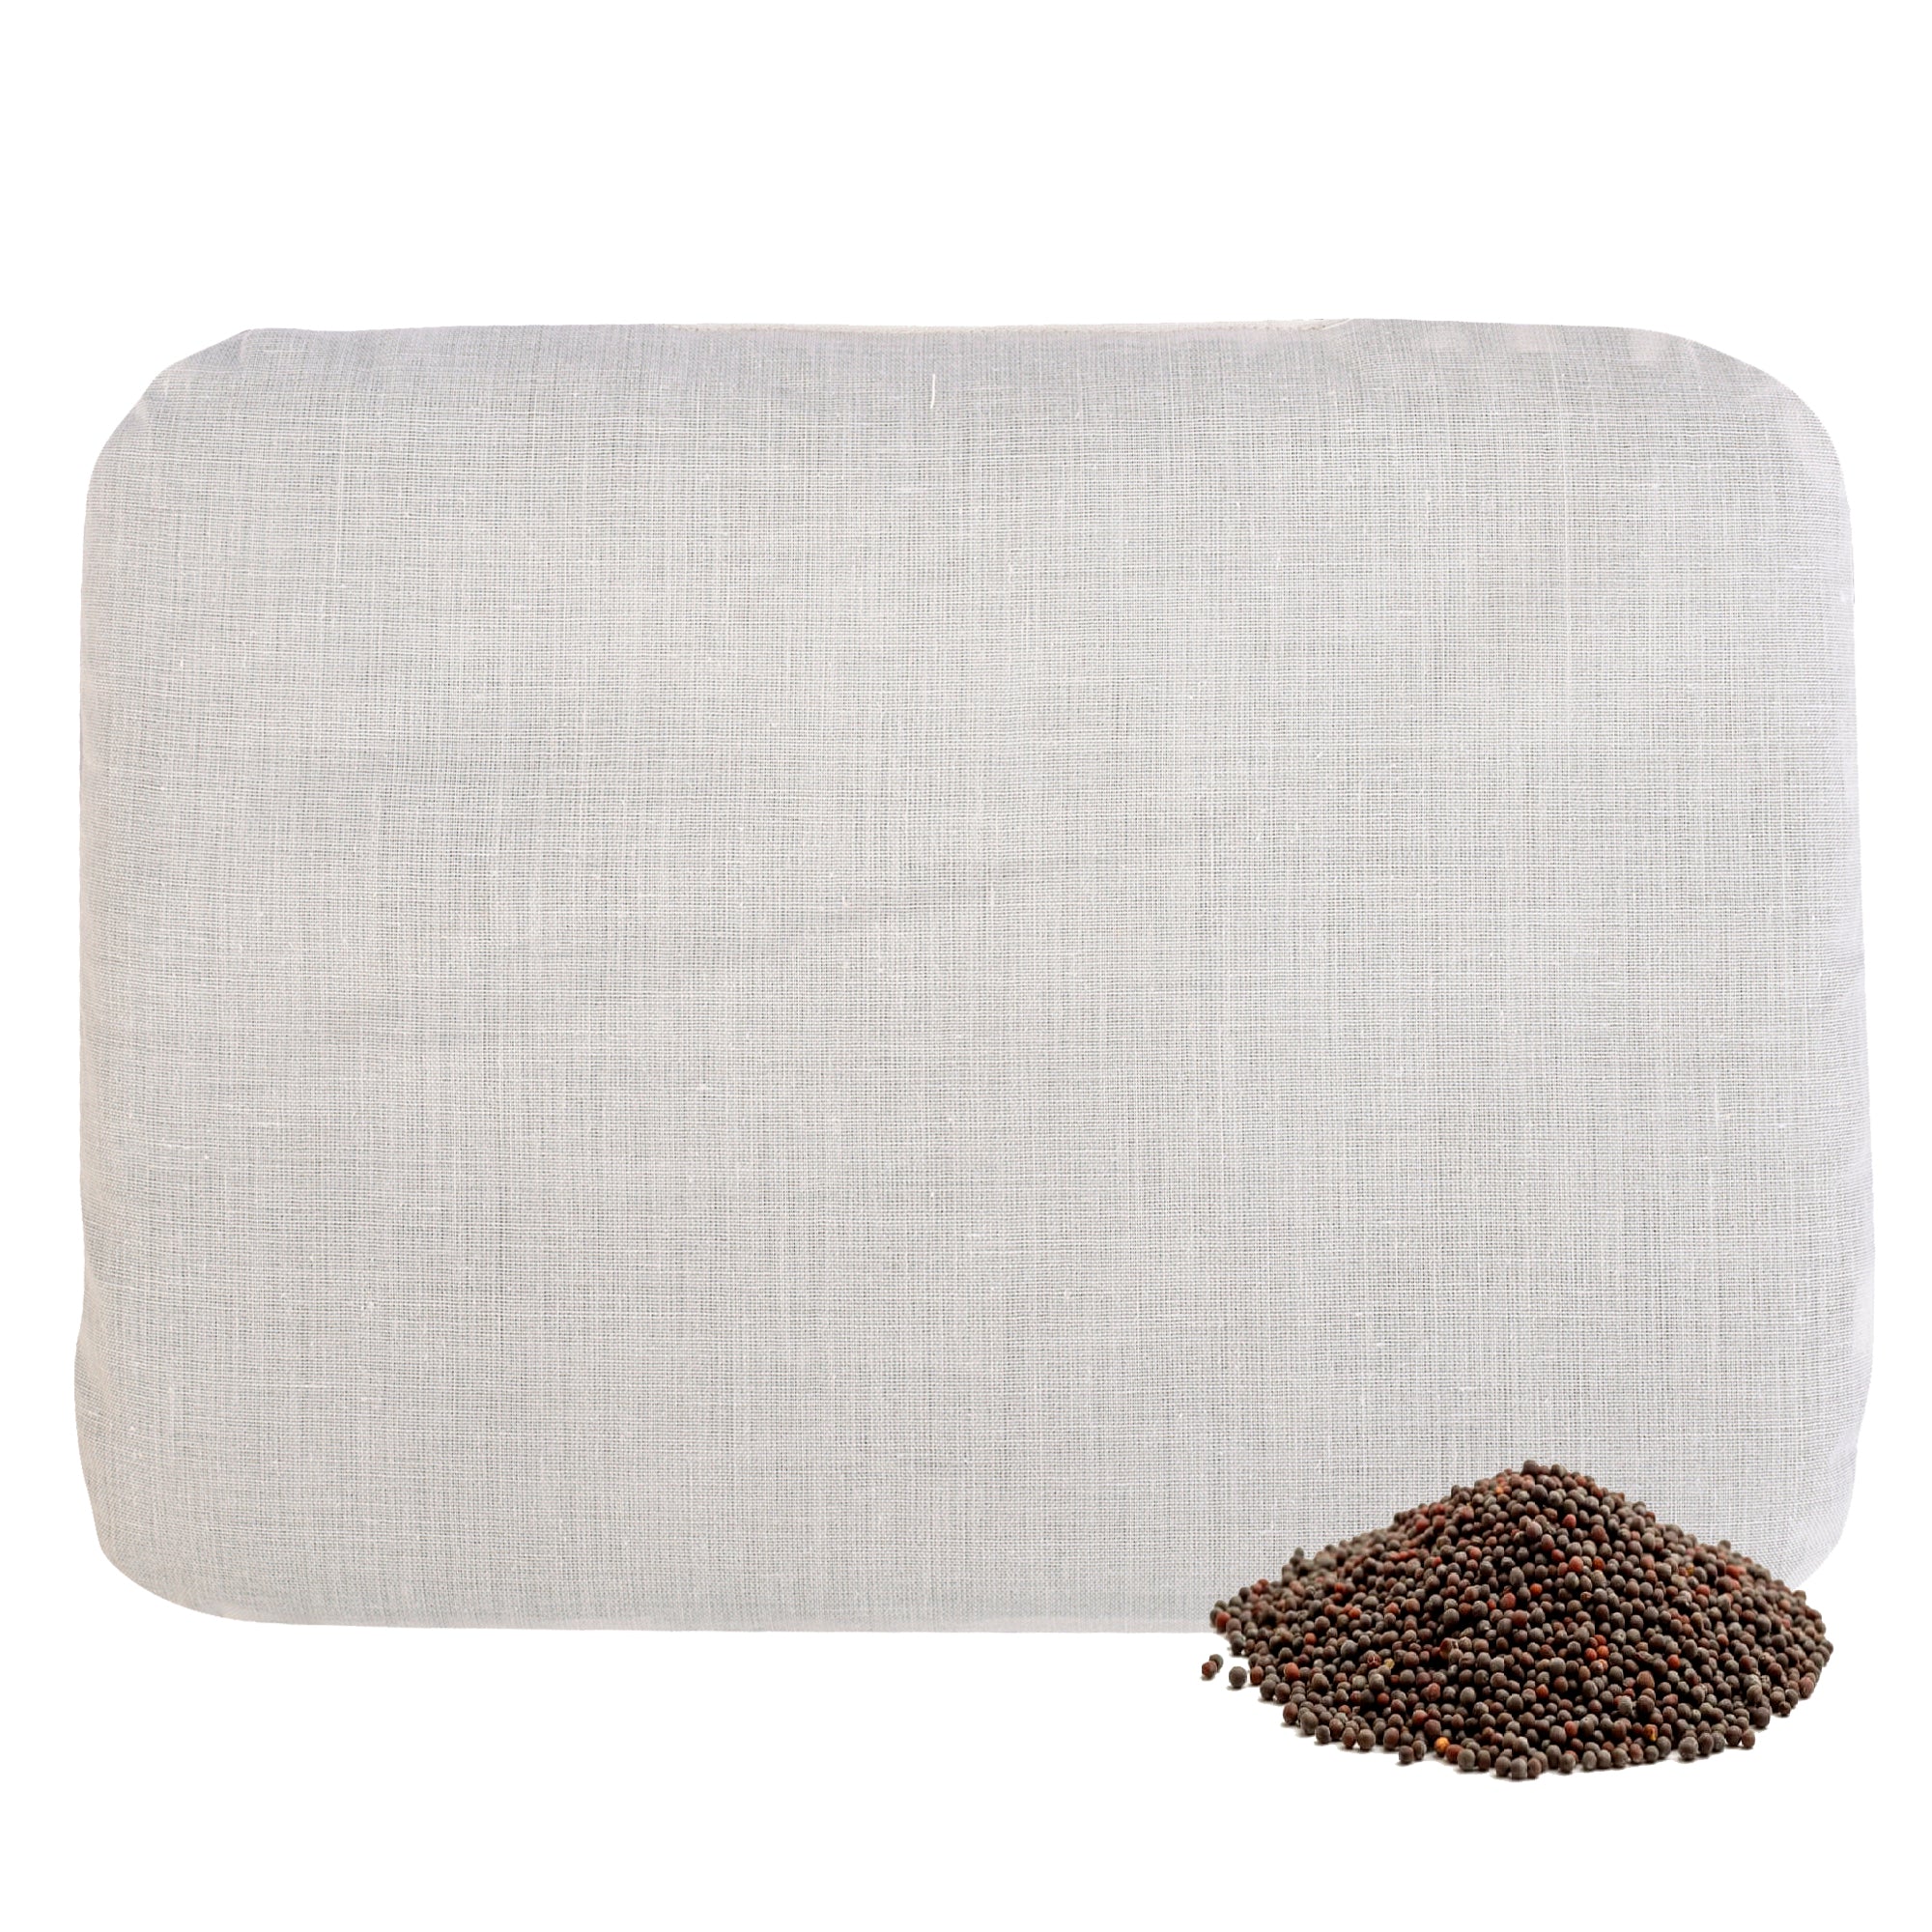 CANTON MUSTARD PILLOW COVER AND FILLER SET